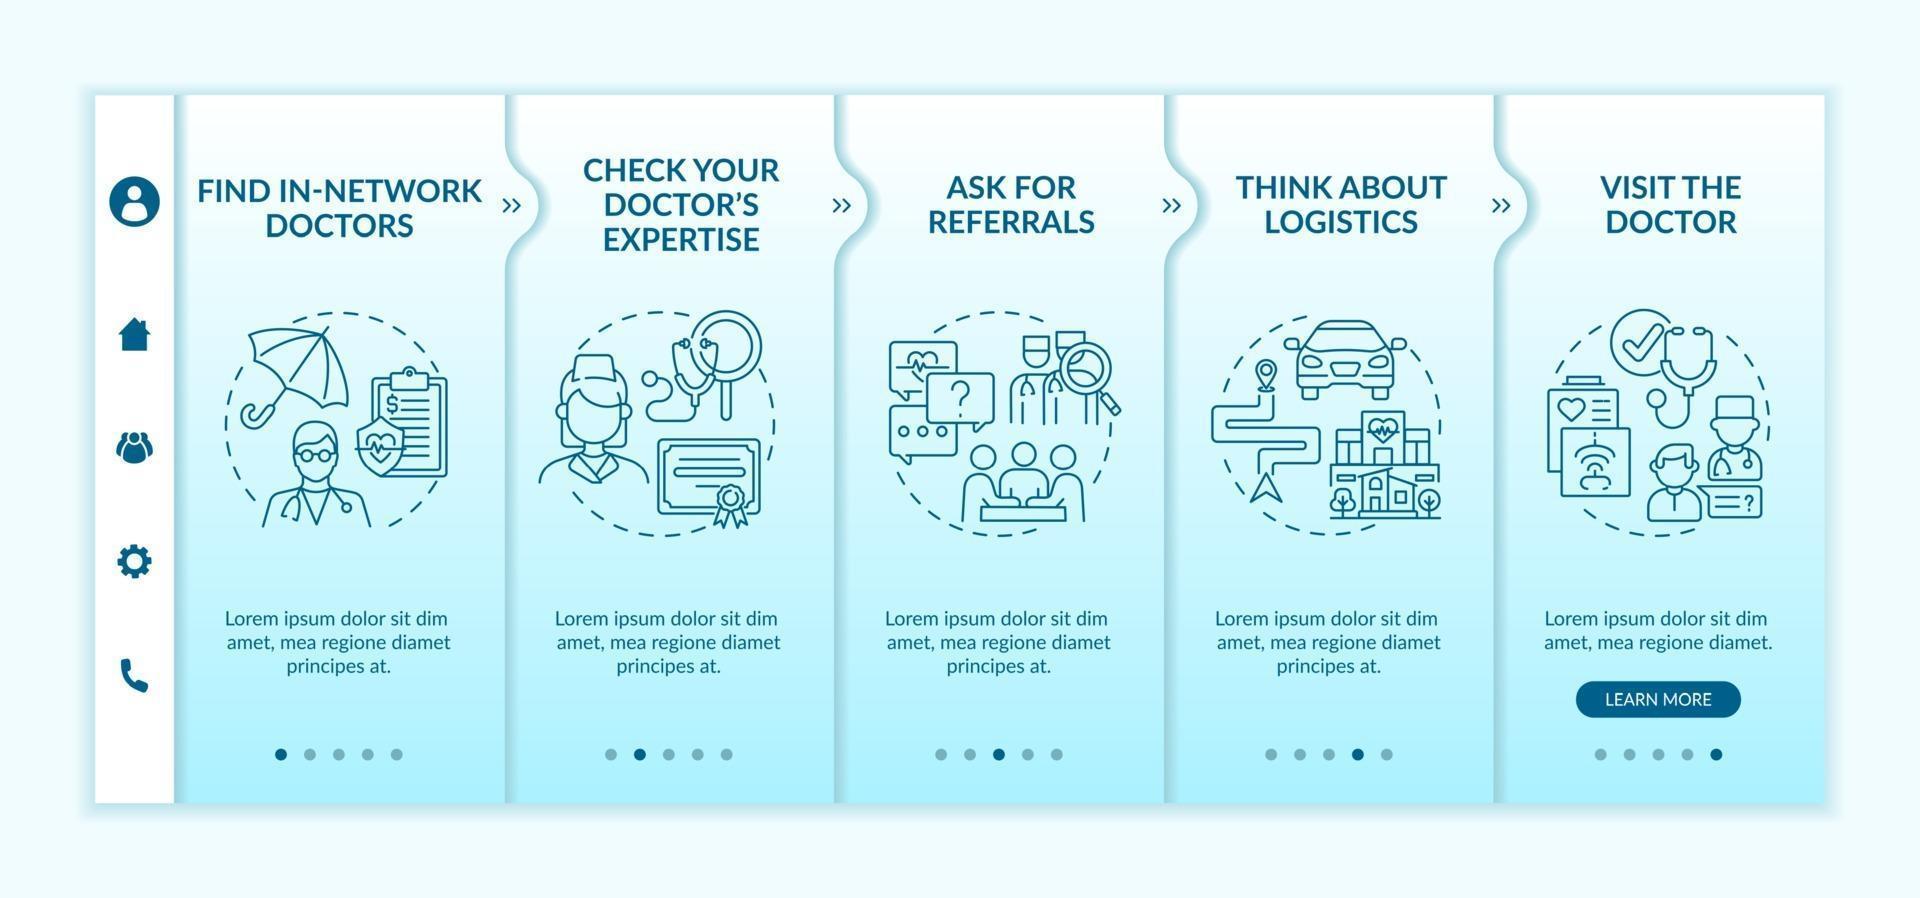 Choosing primary care doctor tips onboarding vector template